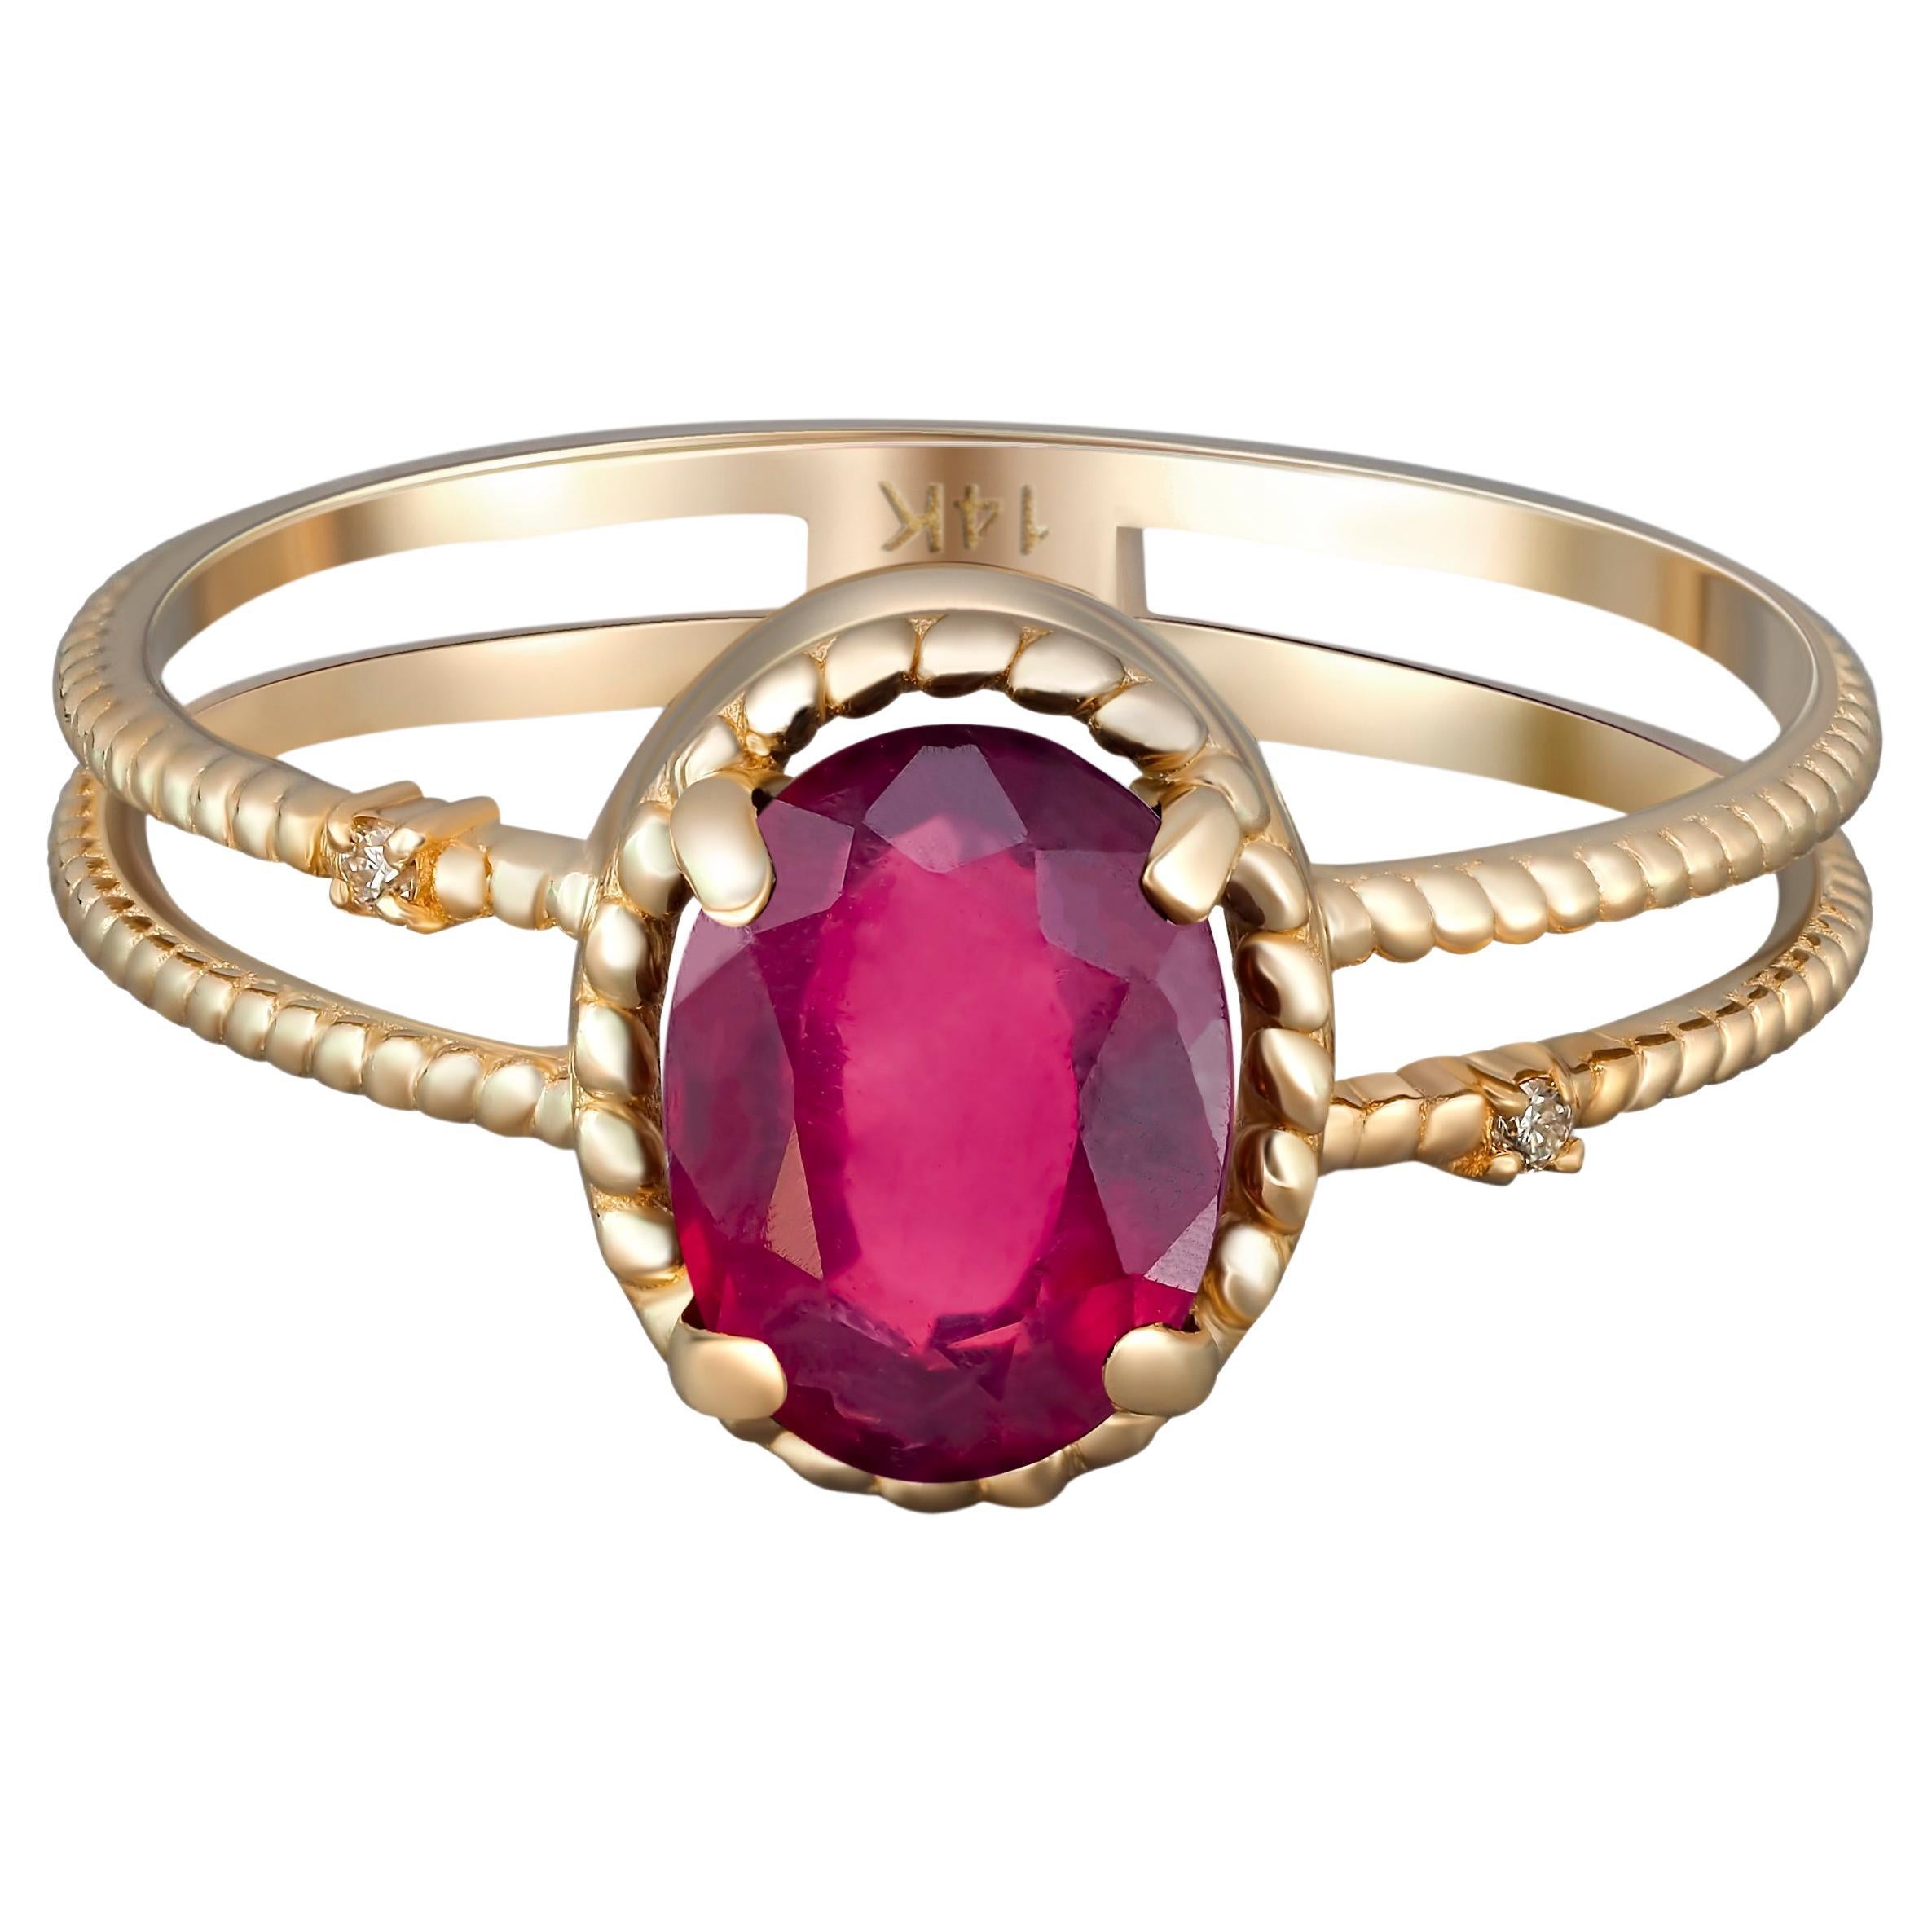 Oval Ruby Ring, 14k Gold Ring with Ruby, Minimalist Ruby Ring For Sale ...